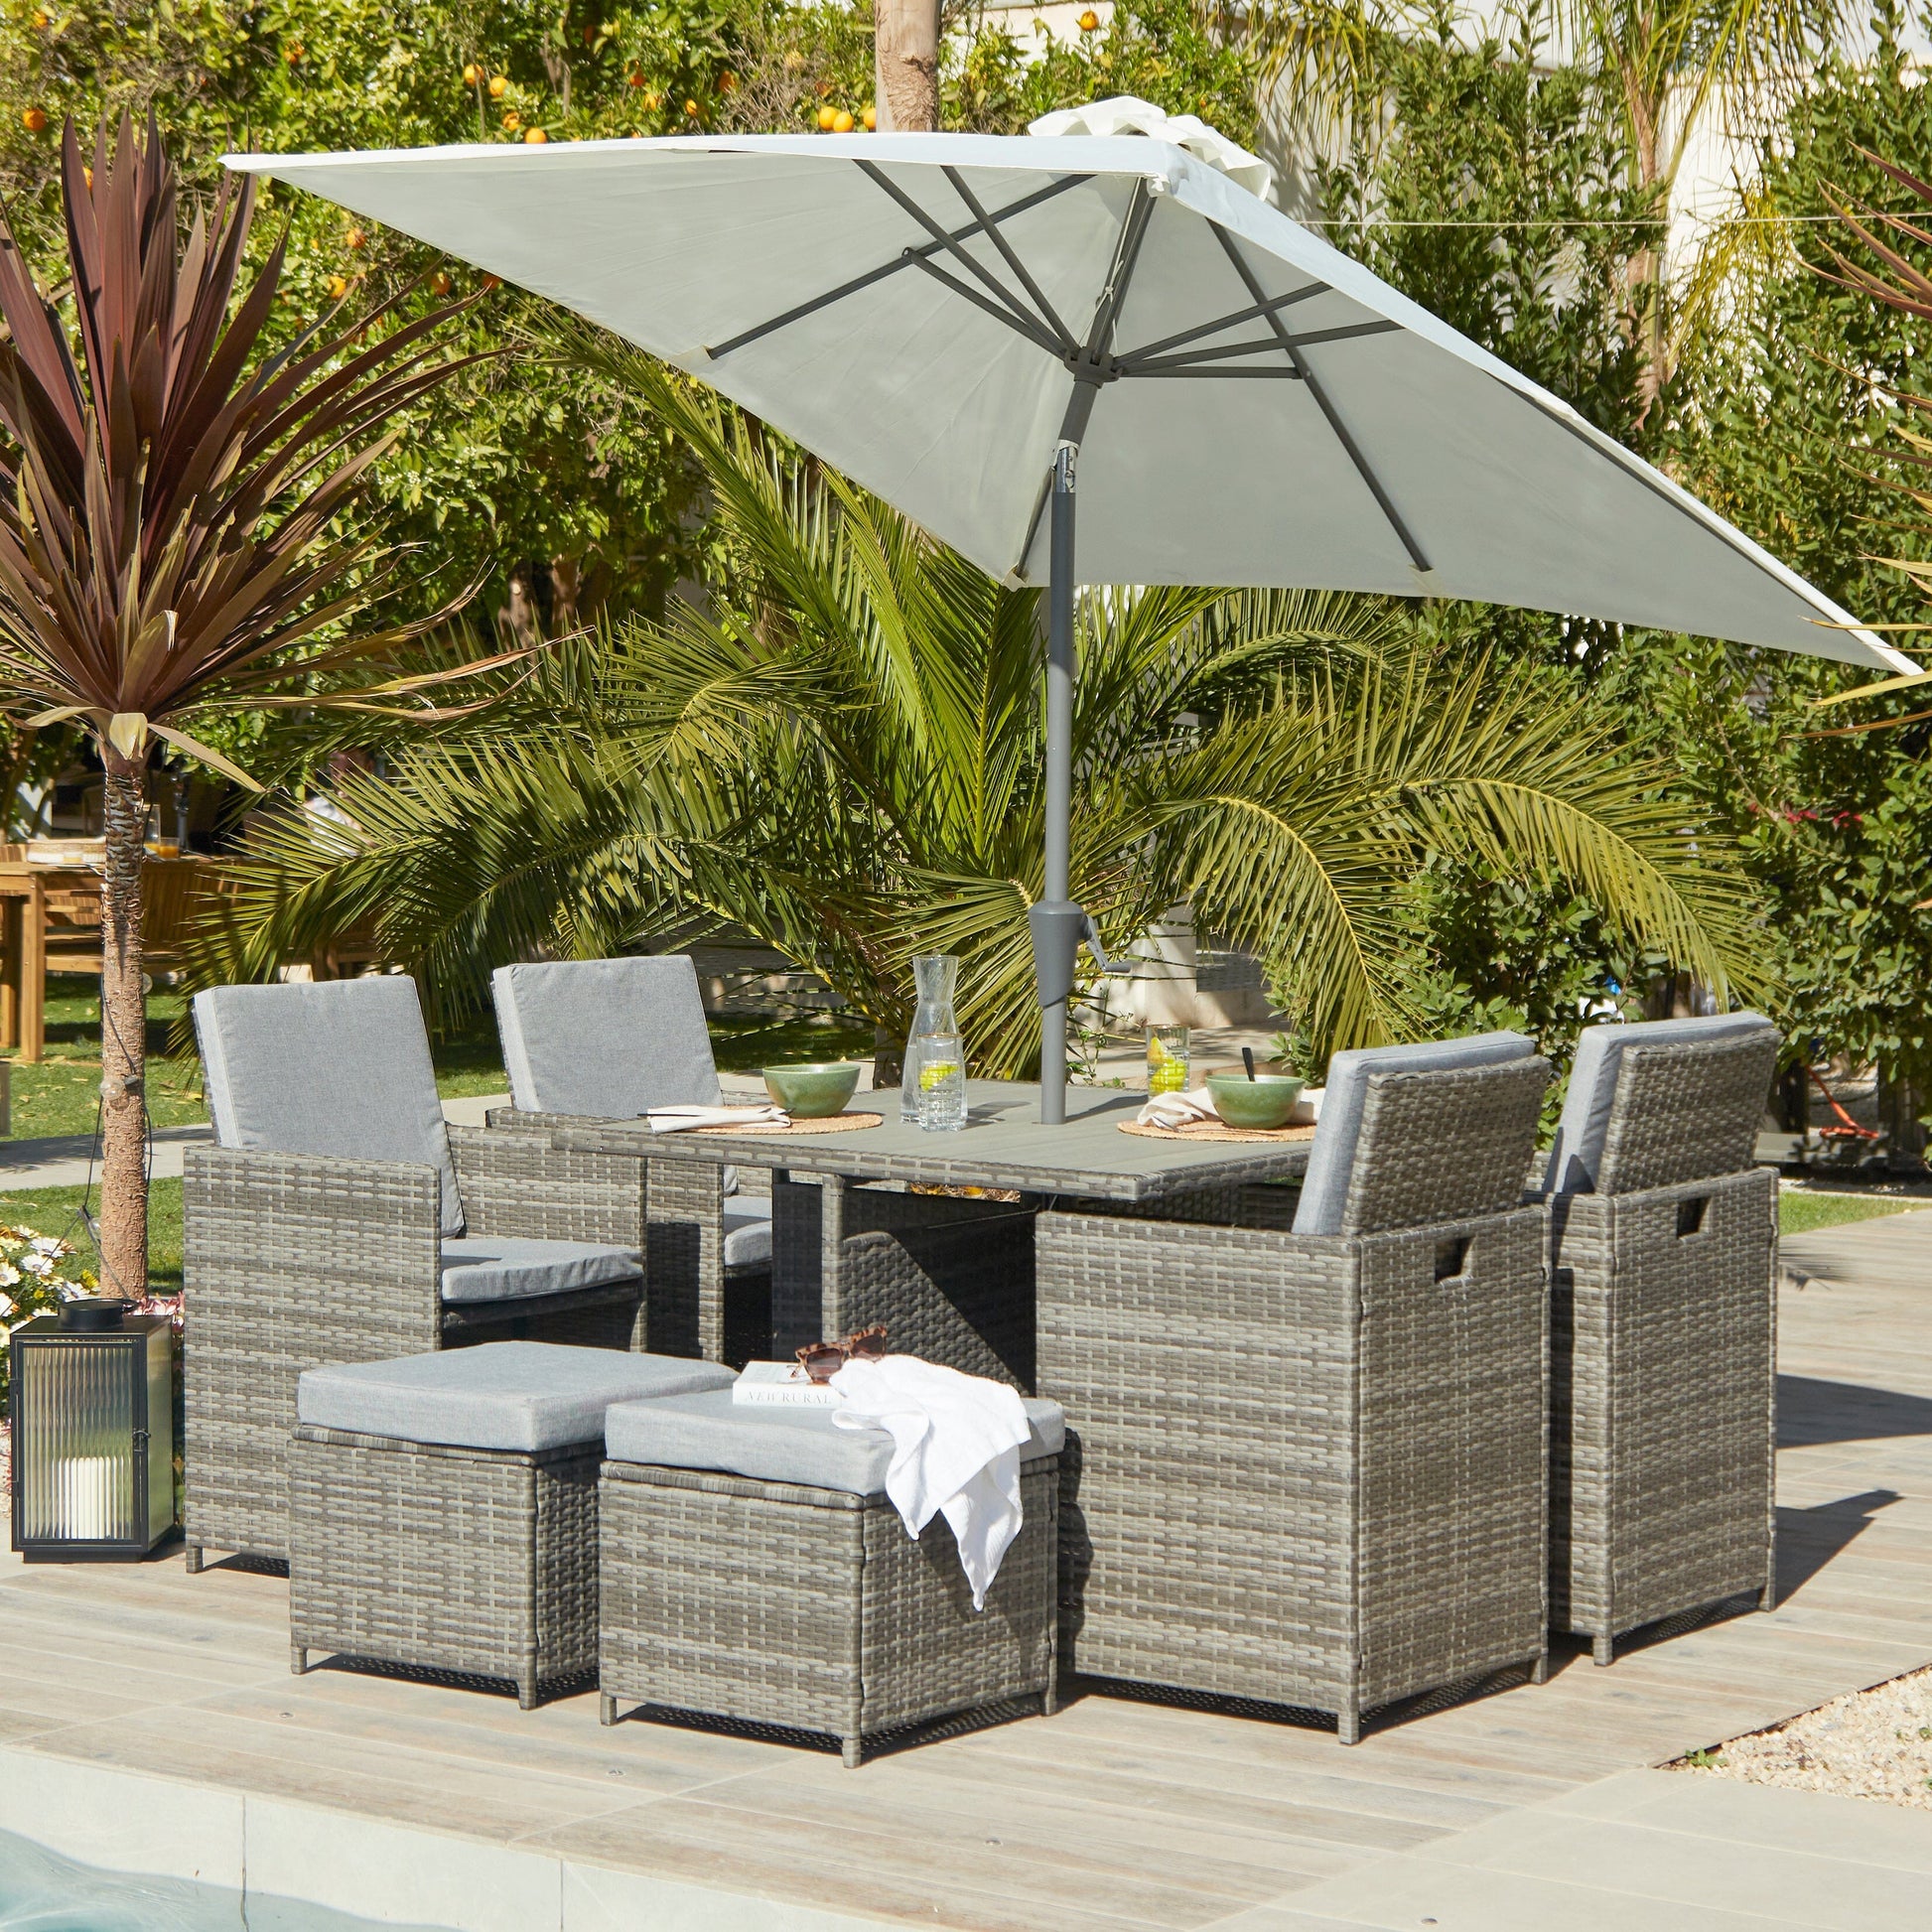 8 Seater Rattan Cube Outdoor Dining Set with Cream Parasol - Grey Weave Polywood Top